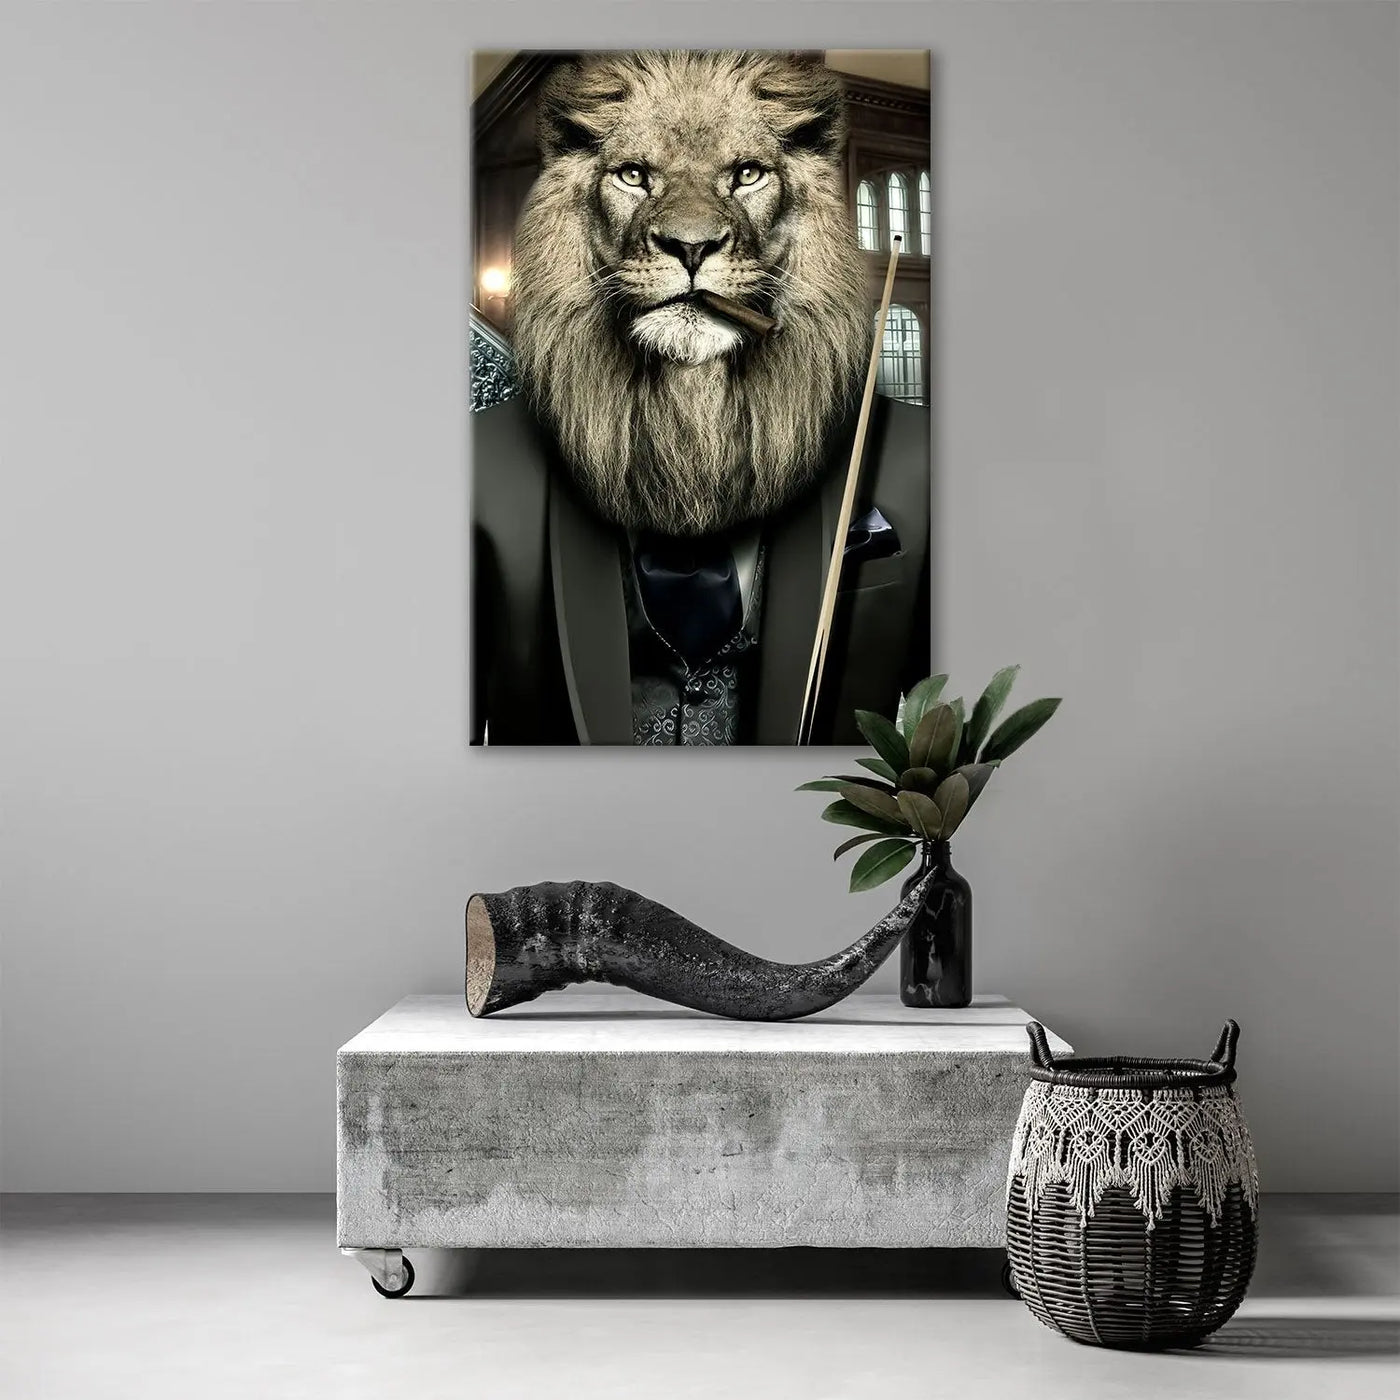 "SUIT LION" - Art For Everyone